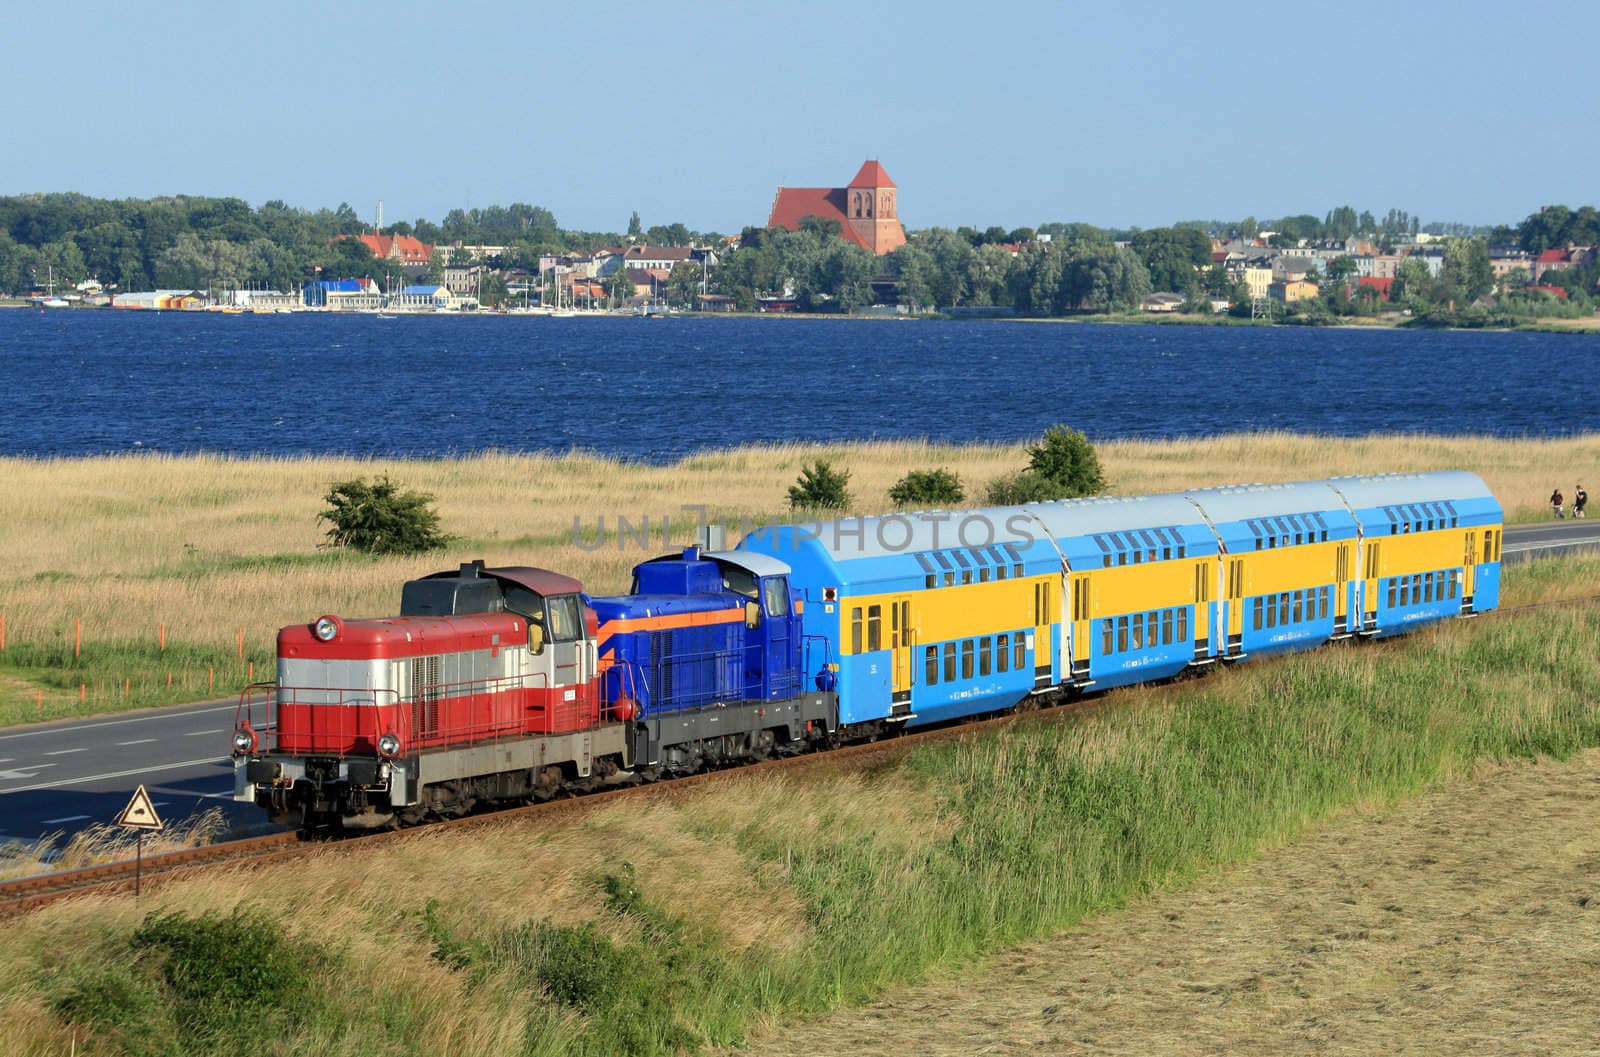 Landscape with the passenger train by remik44992